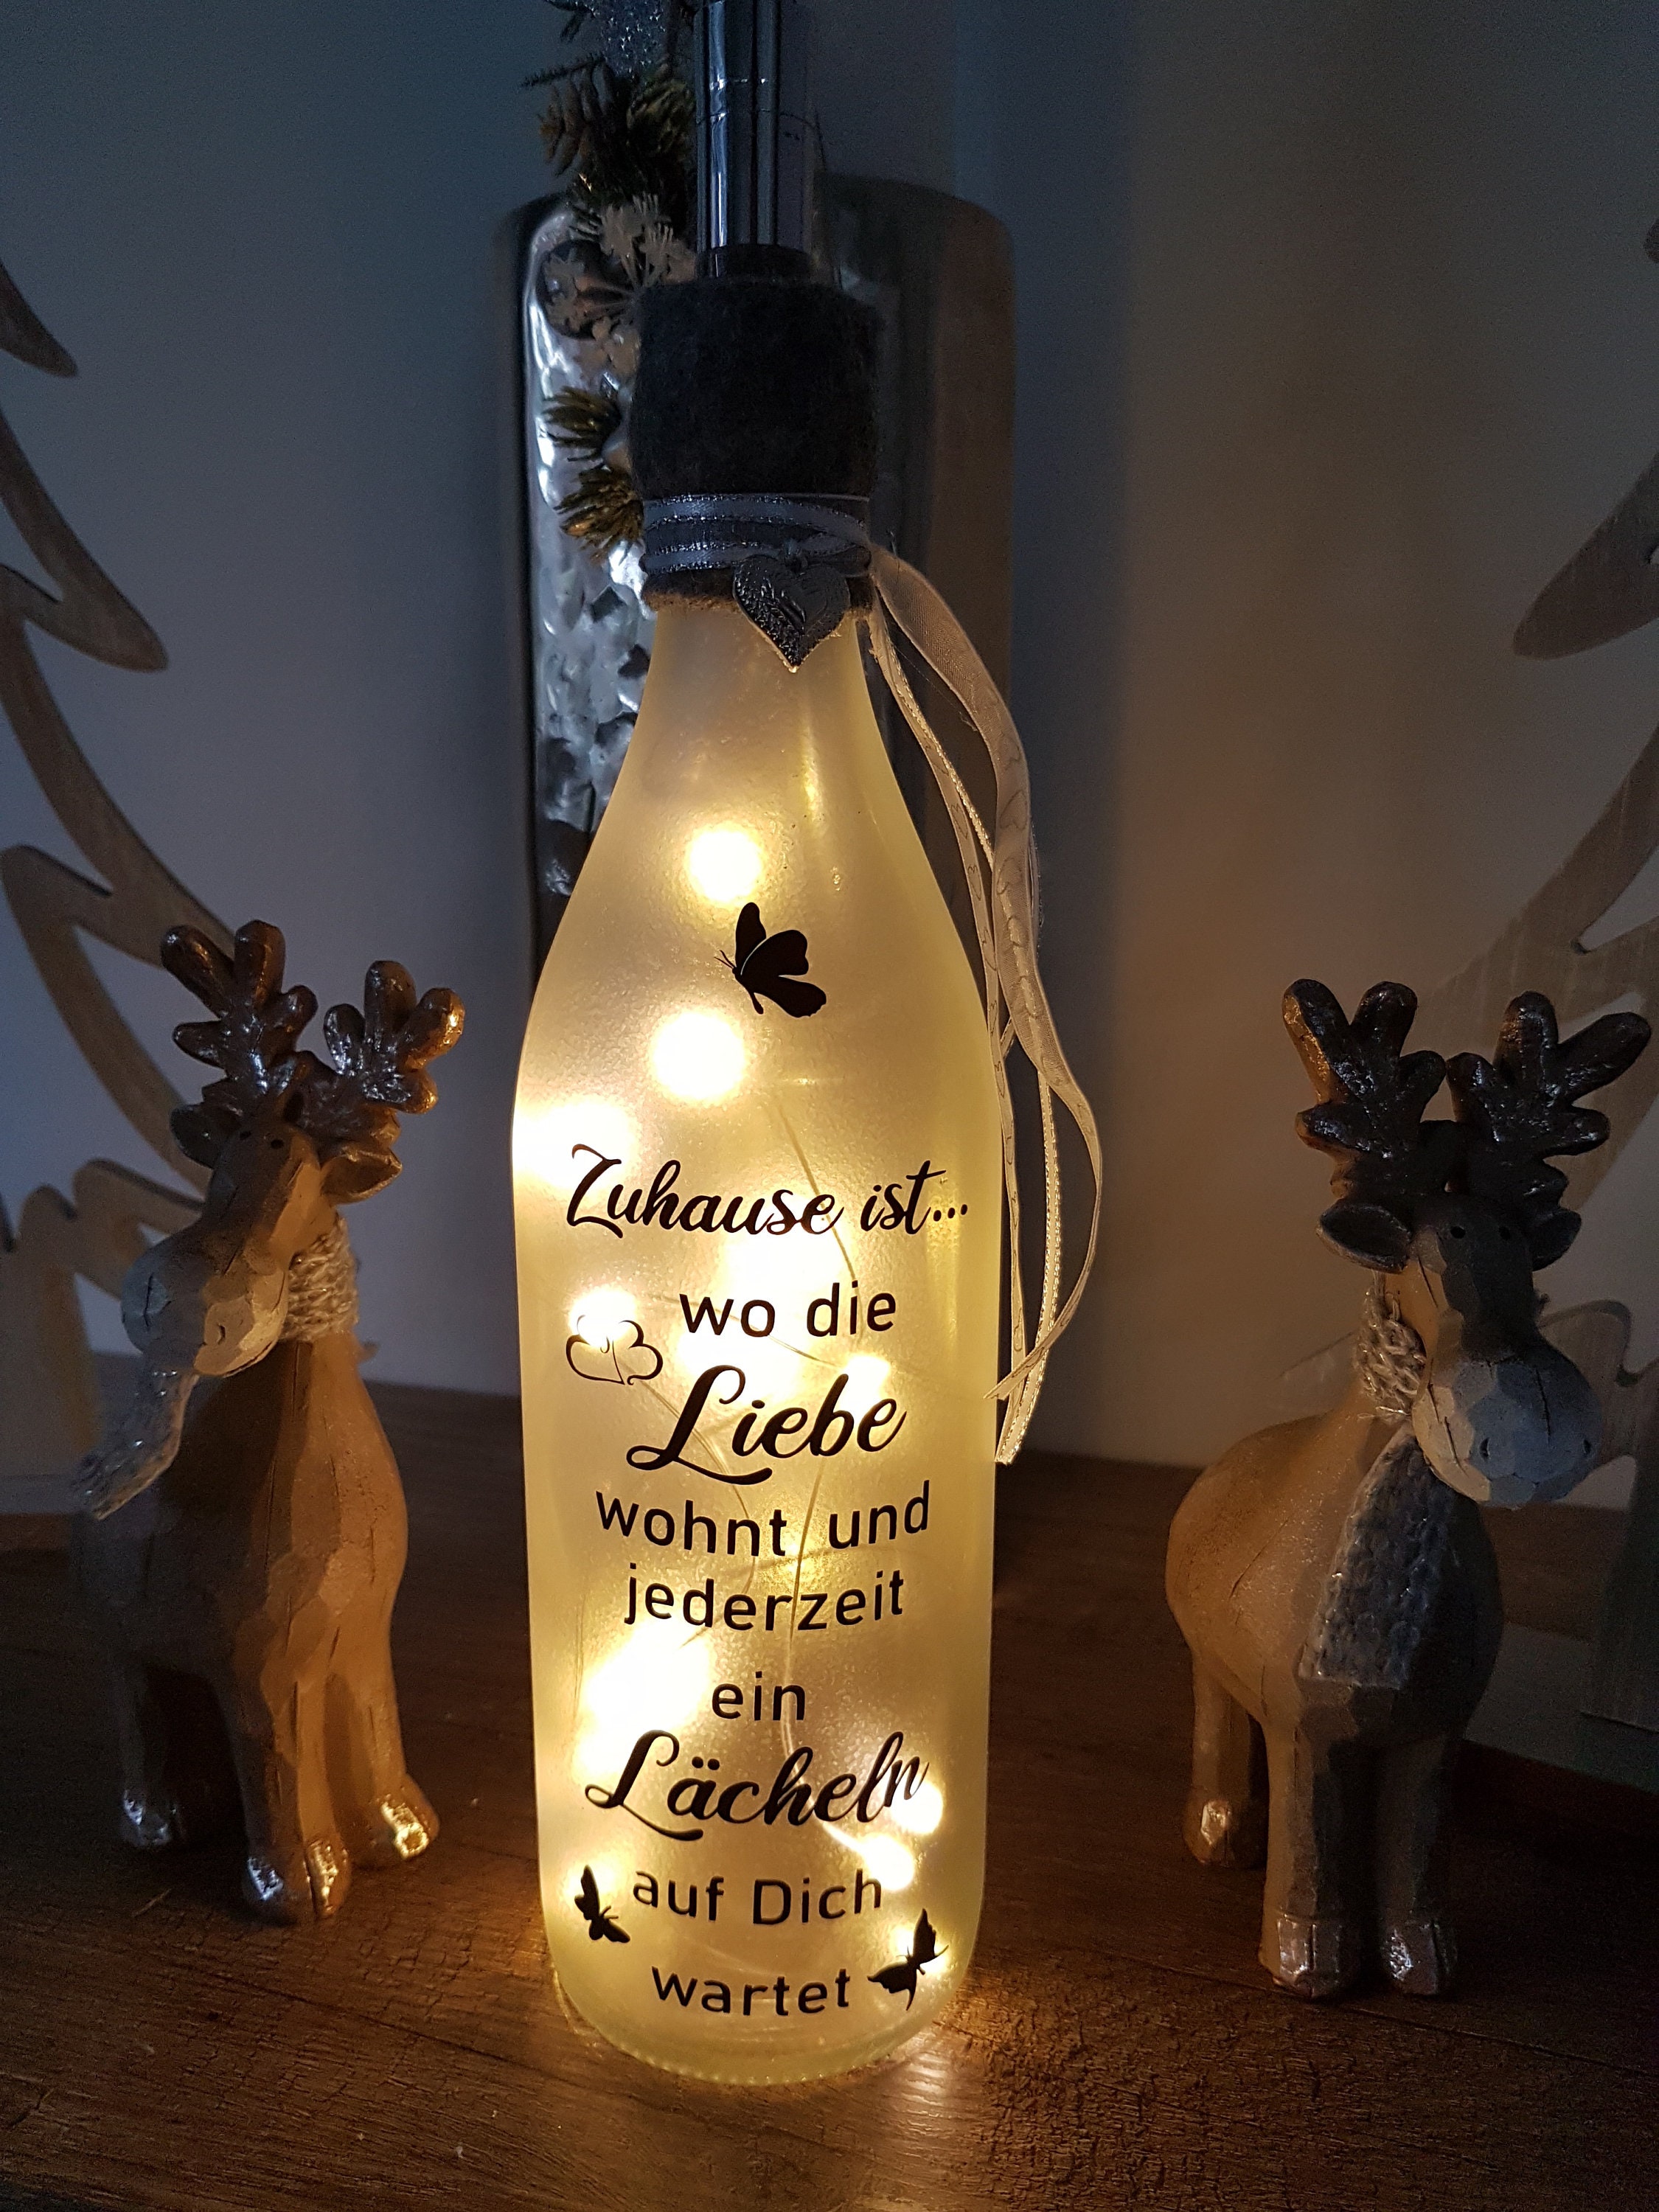 BOUTEILLE LUMINEUSE «RENNE»